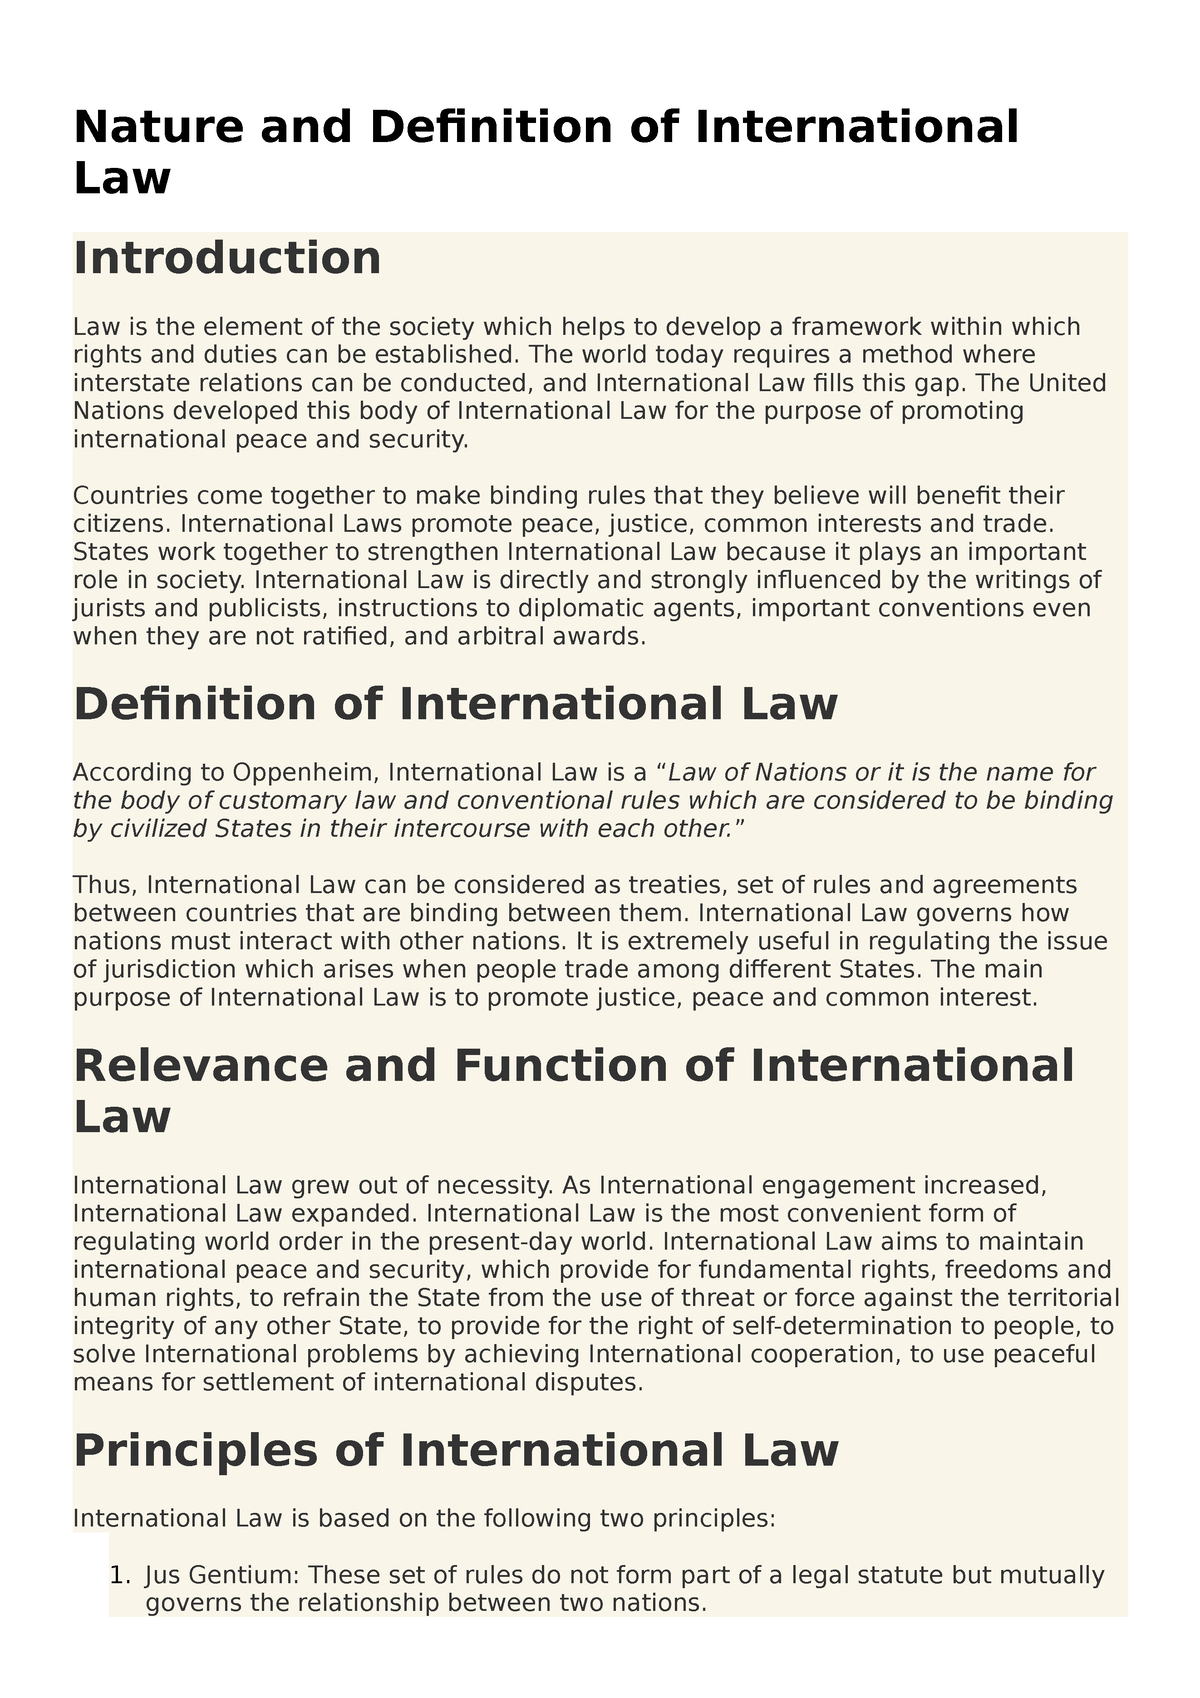 research topics on public international law